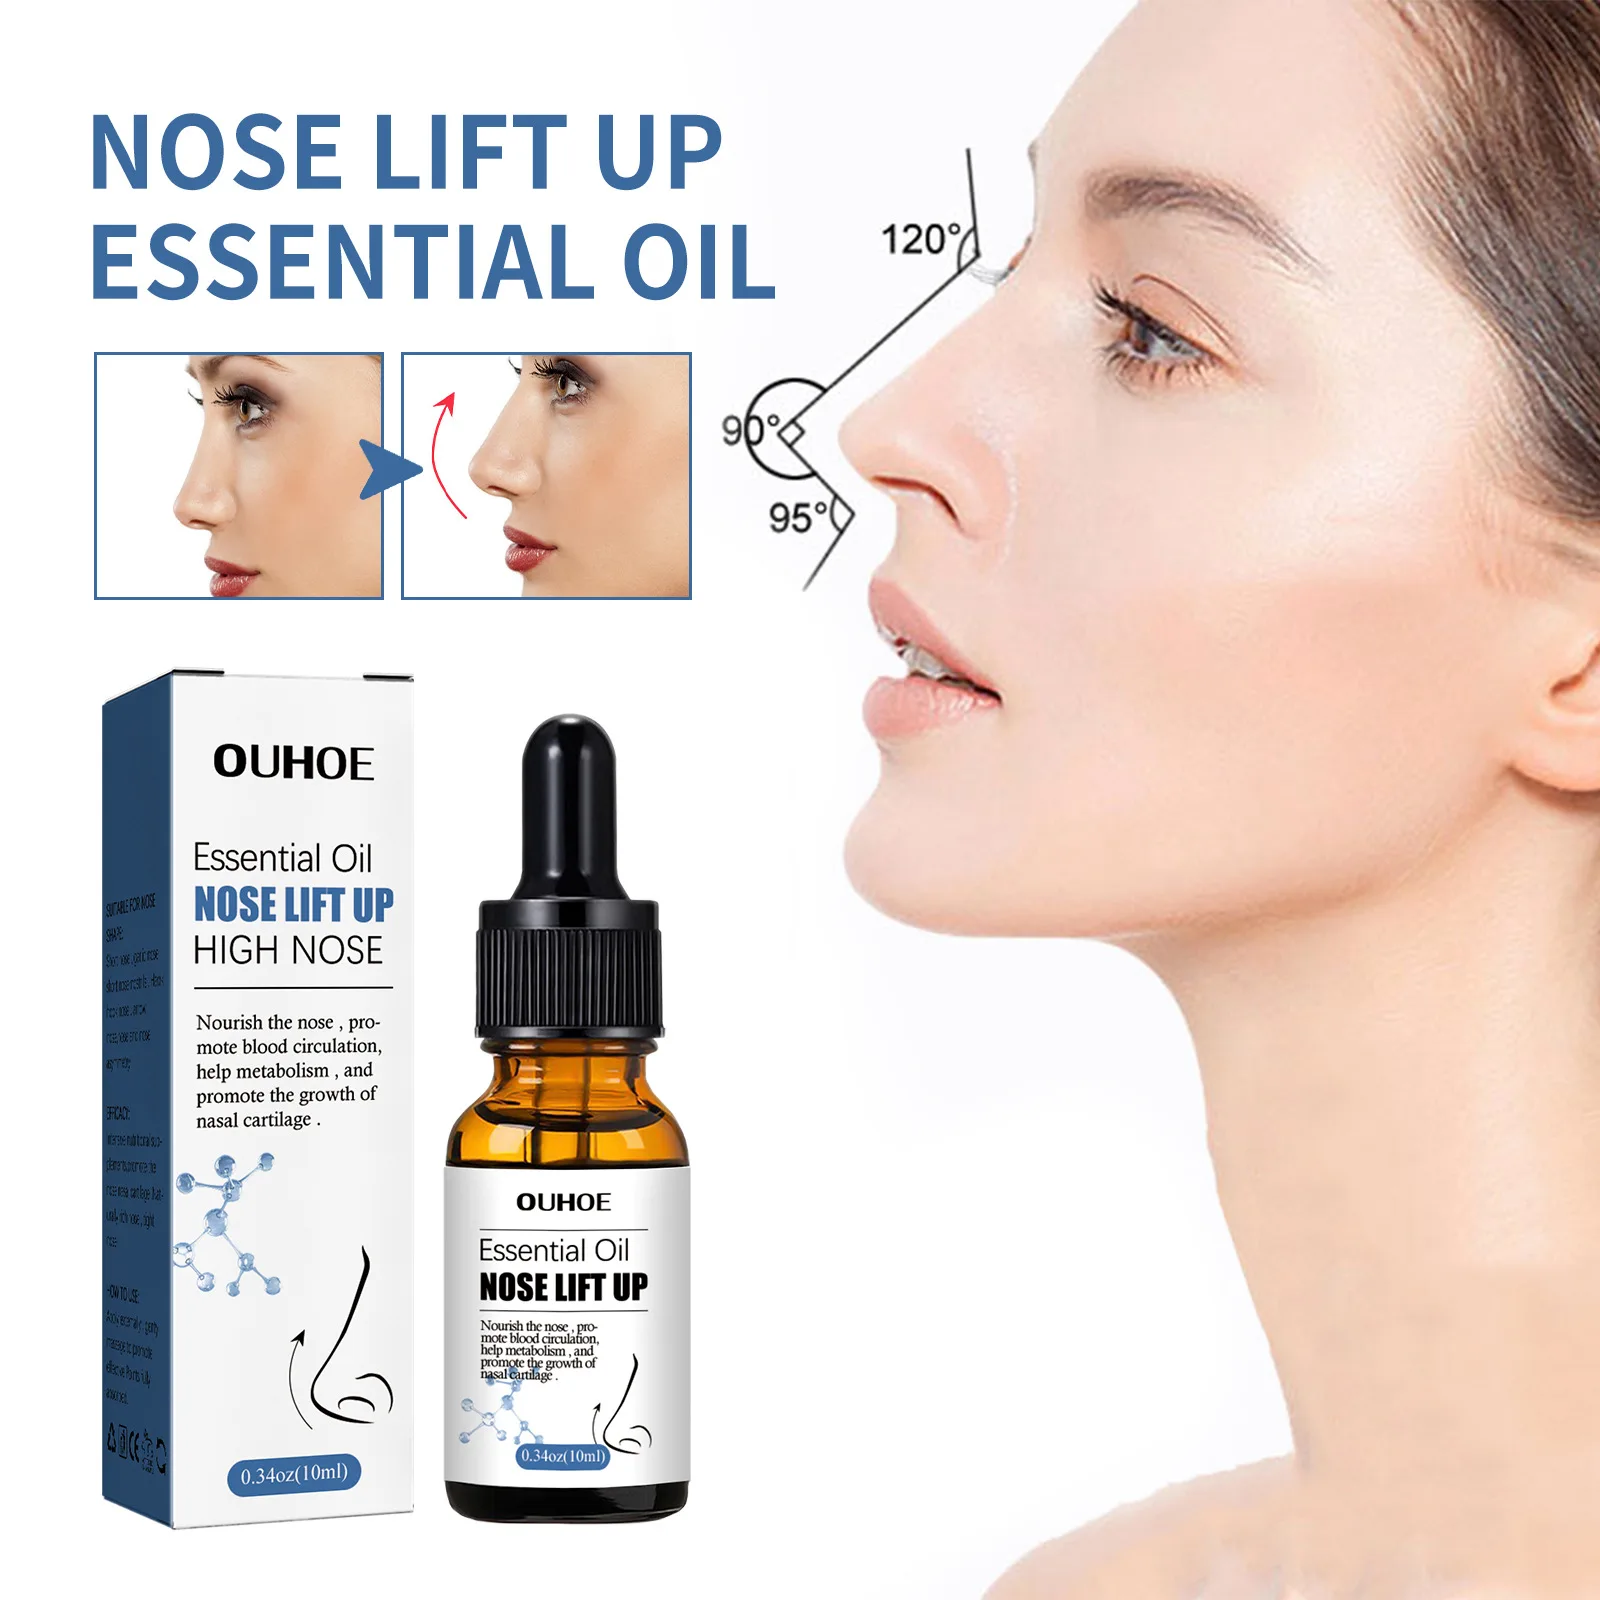 Nose Lift Up Essential Oil Heighten Rhinoplasty Oil High Nose Nourish Nose Firm Remodeling Promote The Growth Of Nasal Concha